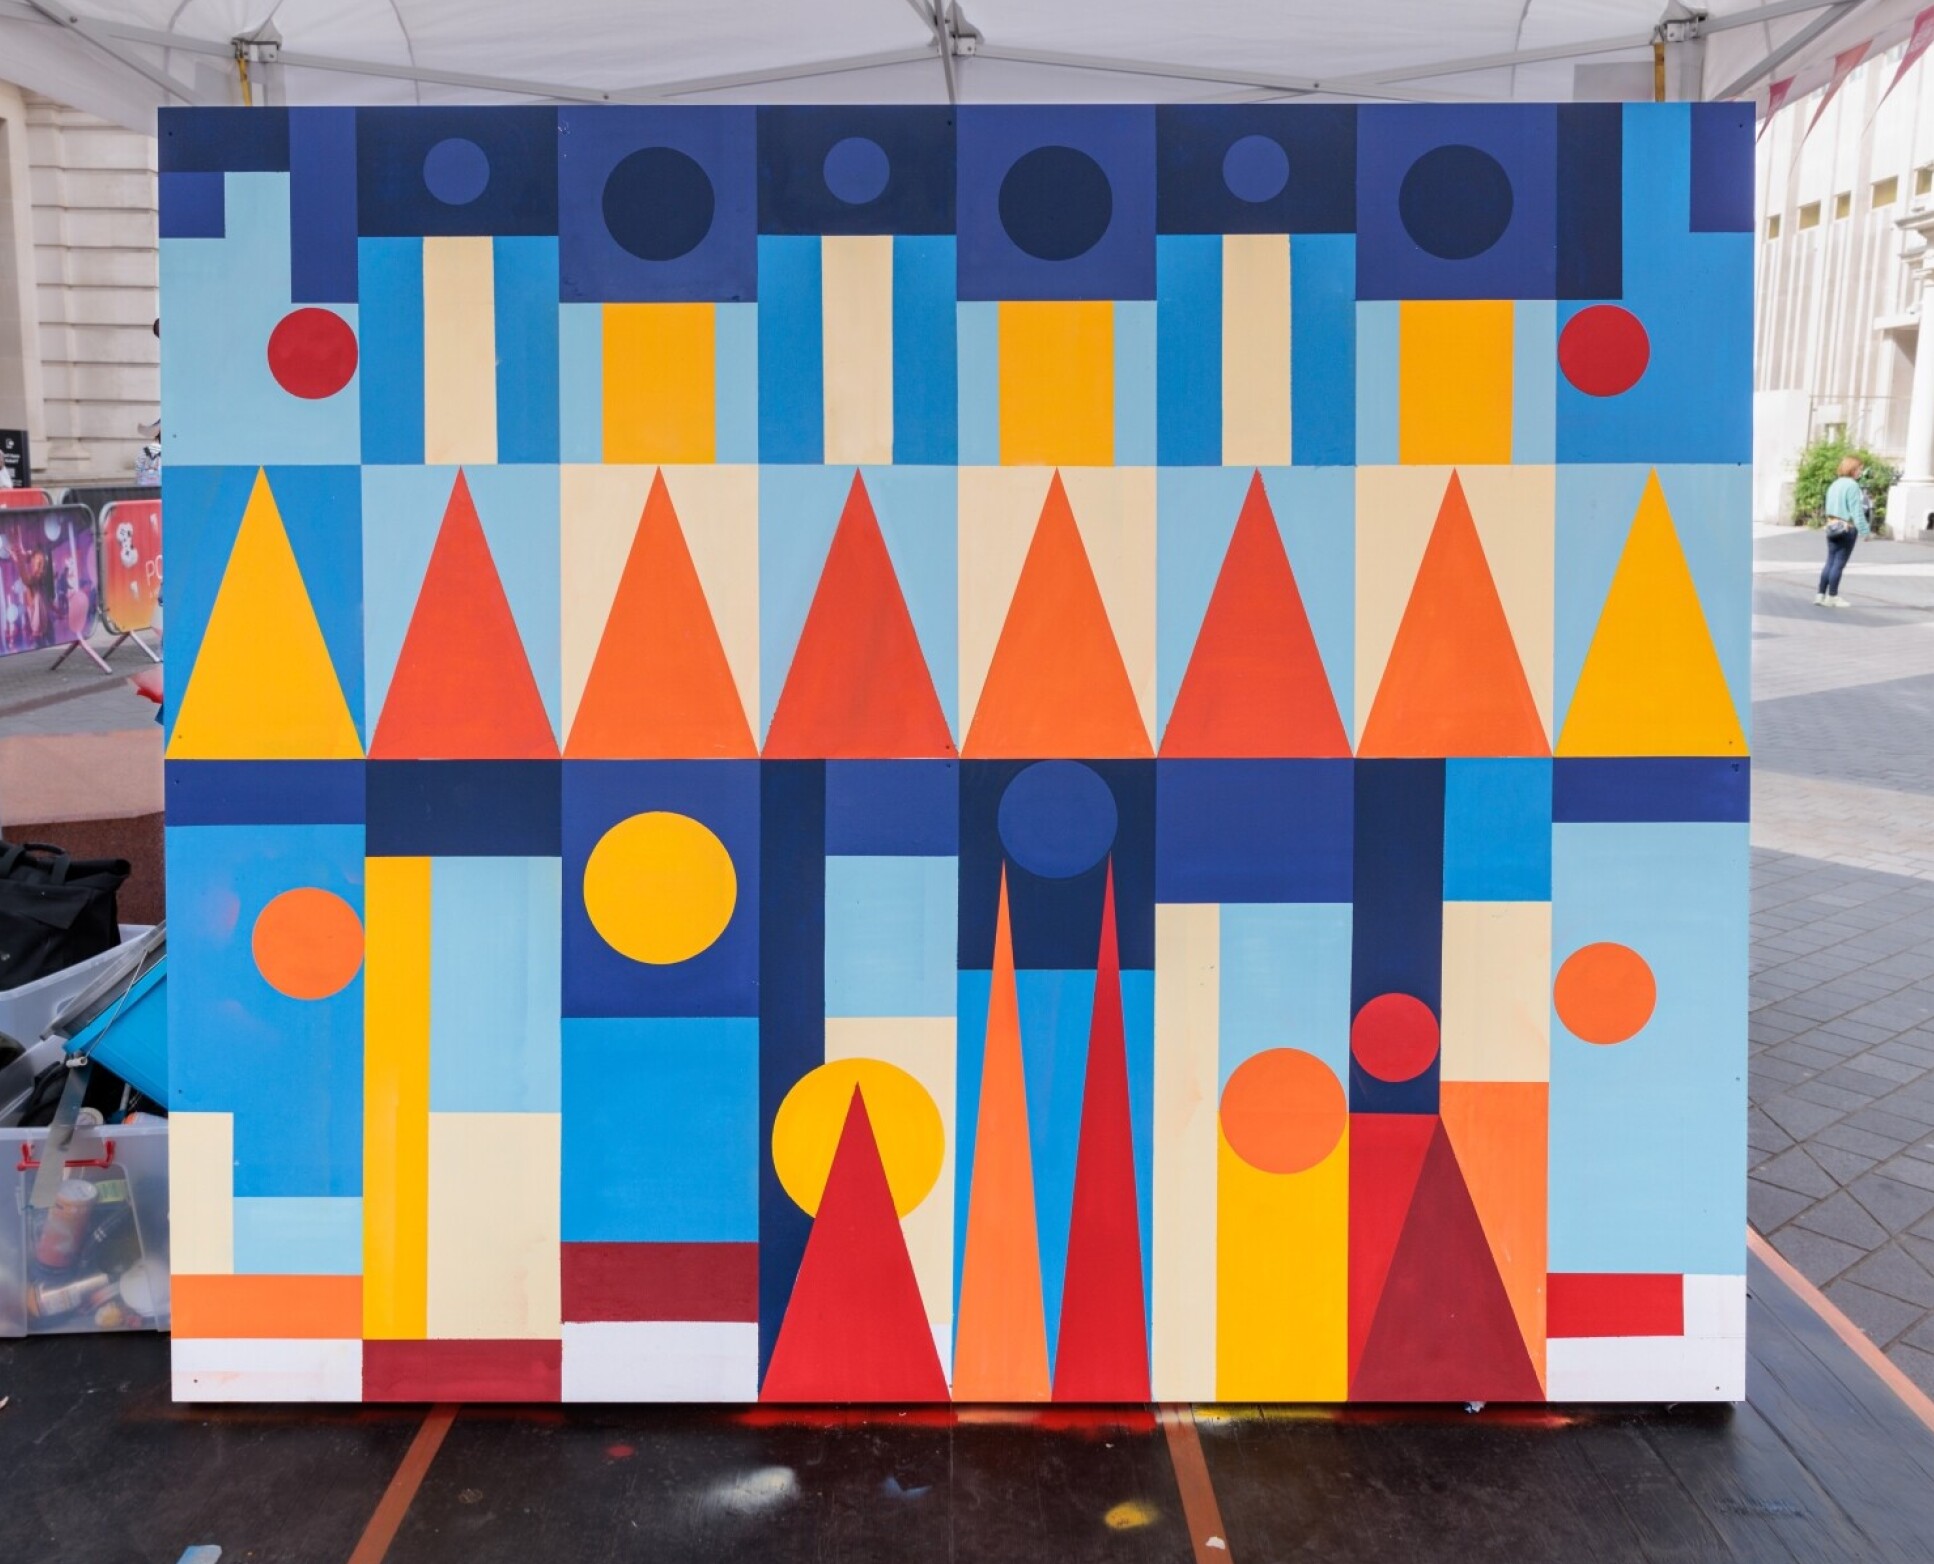 Matt Dosa's finished painting at the Great Exhibition Road Festival